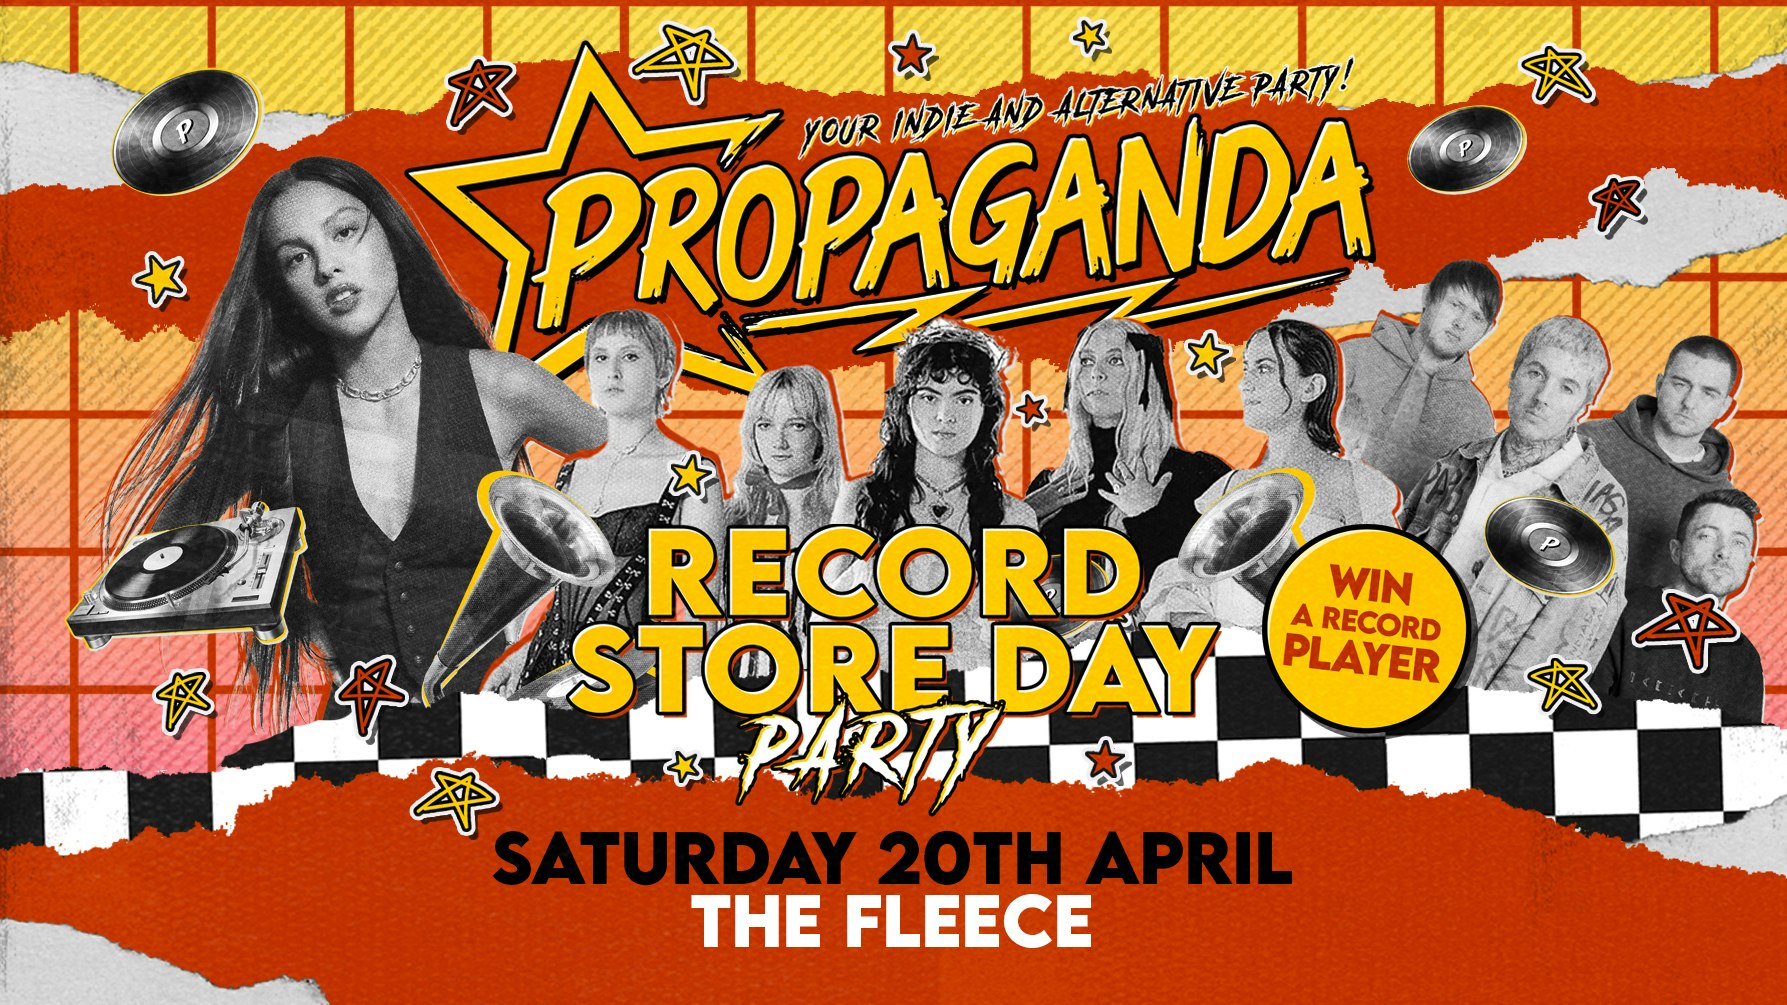 TONIGHT! Propaganda Bristol Record Store Day Party! – Your Indie & Alternative Party!